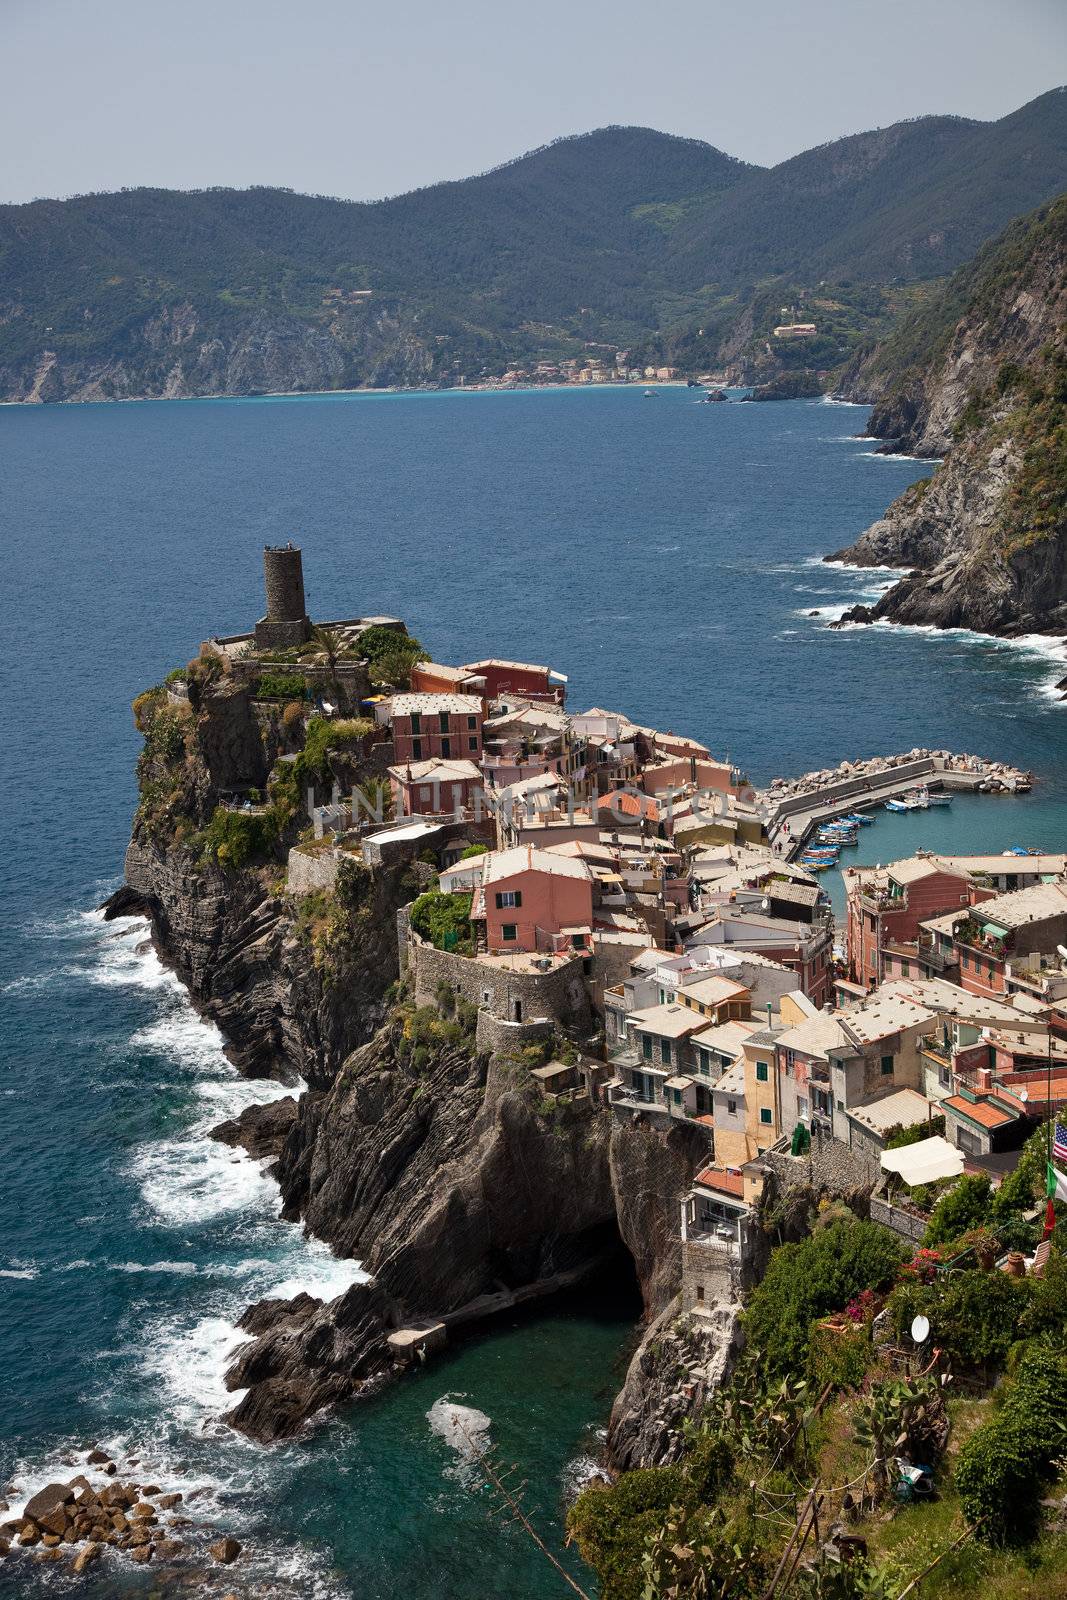 Little town in the cinque terre called Vernazza